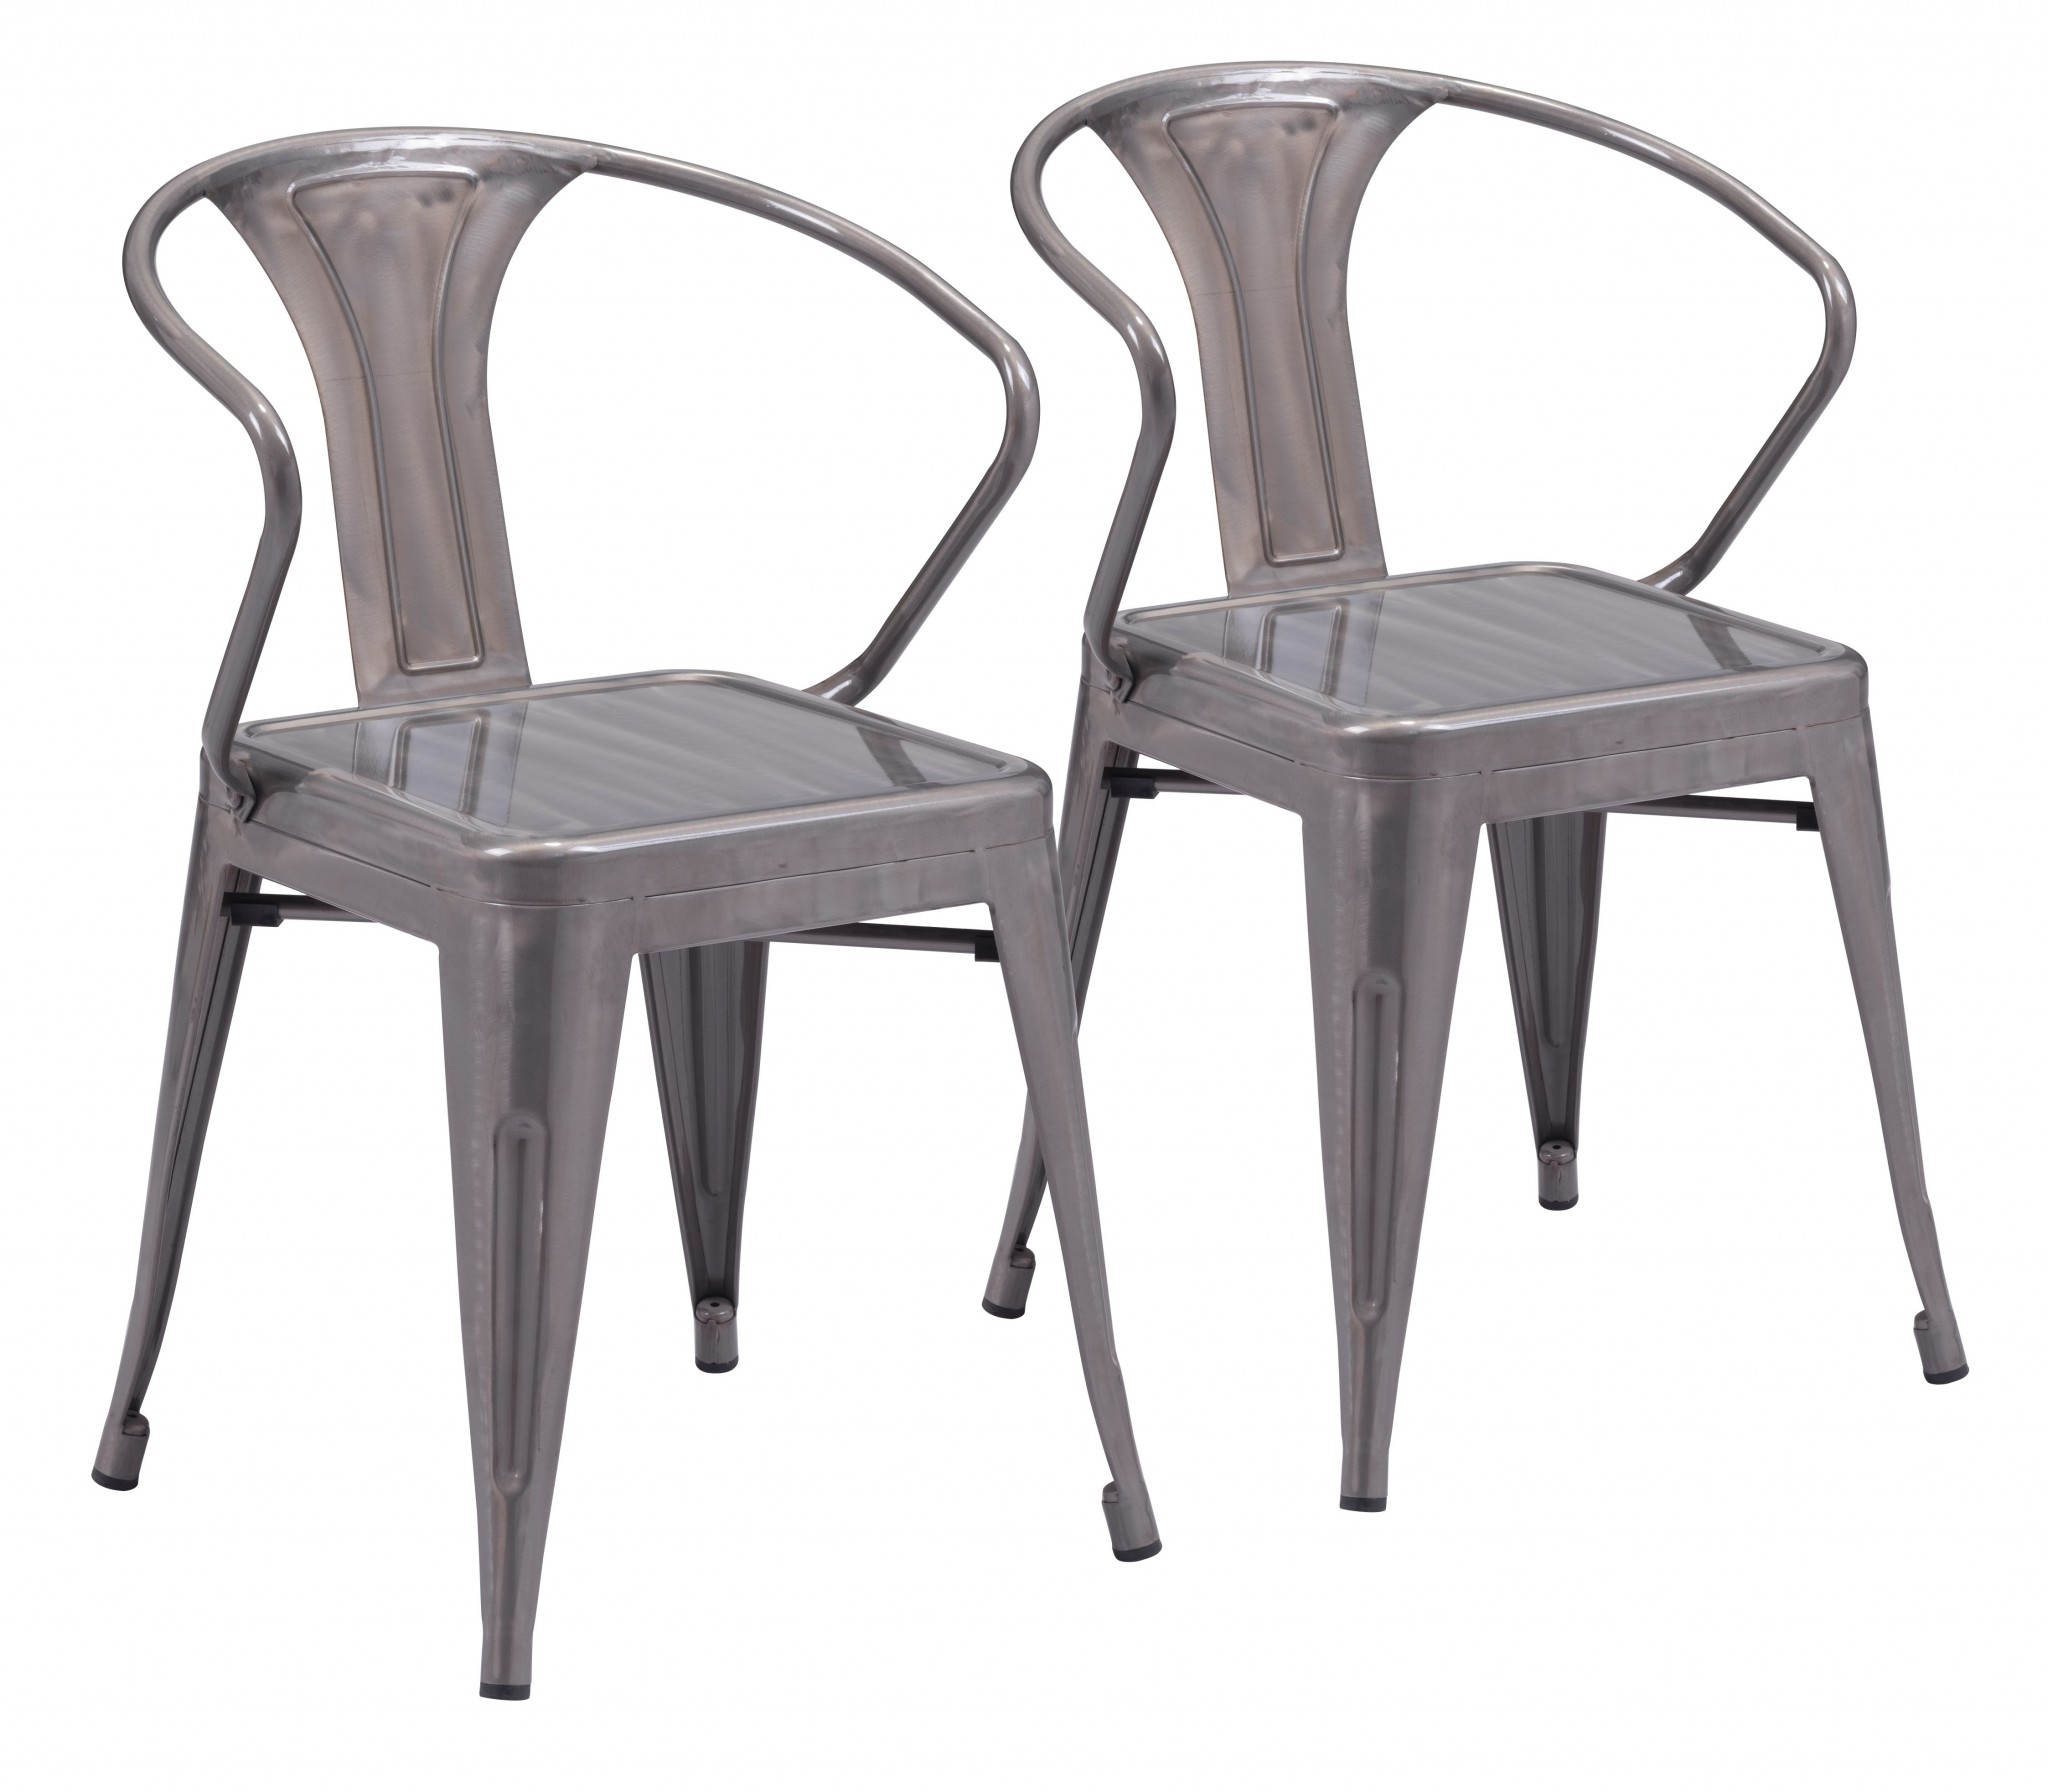 Set of Two Gray Curved Steel Dining Chairs